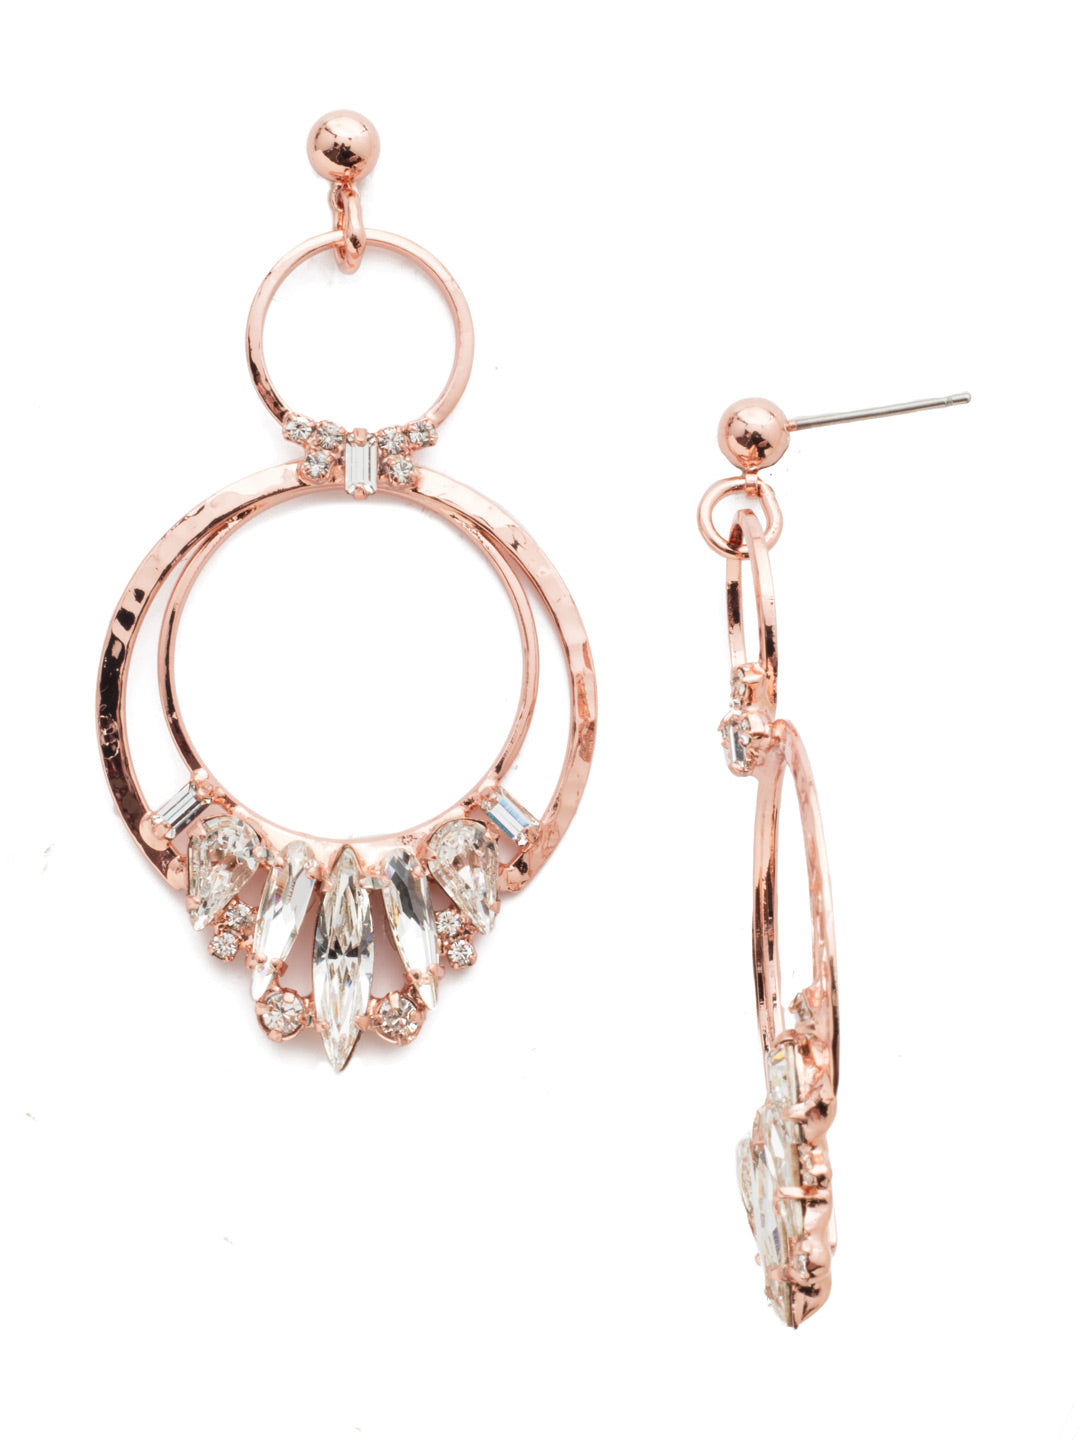 Rolling Stones Dangle Earrings - EDM69RGCRY - <p>Three circular hammered rings are adorned with elongated pointed crystals, petite rounds and dainty baguettes. From Sorrelli's Crystal collection in our Rose Gold-tone finish.</p>